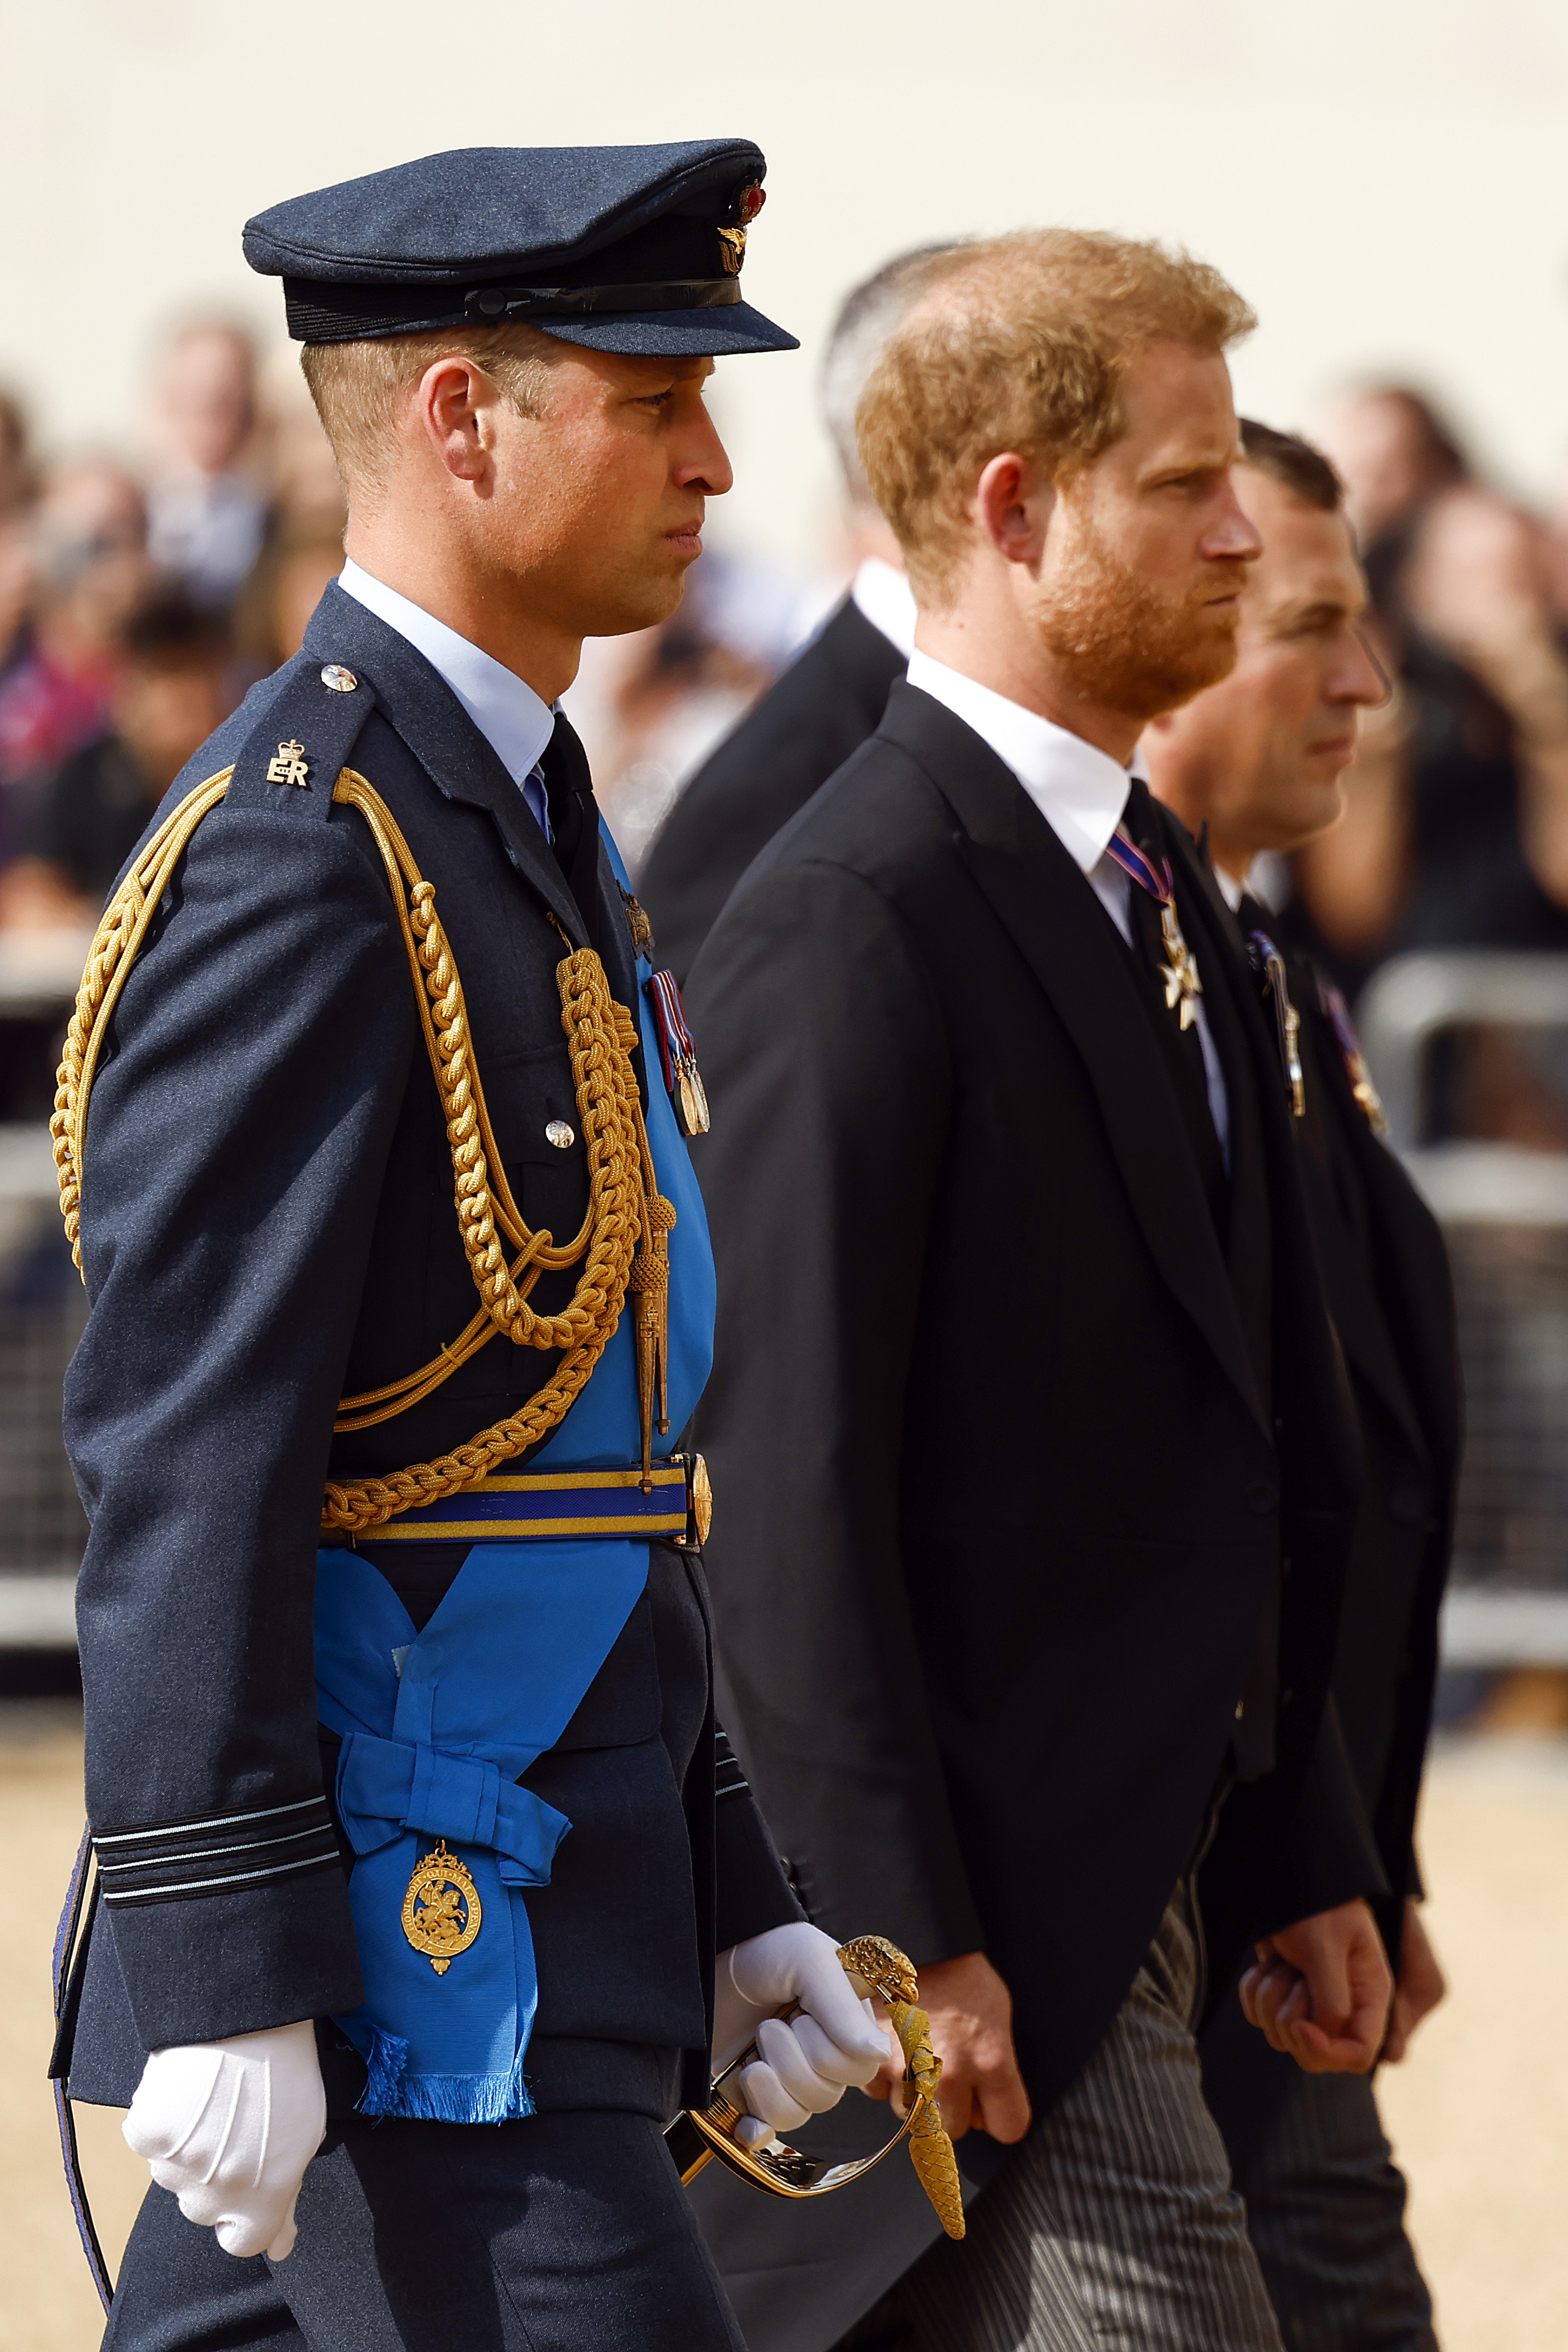 <p><a href="https://www.wonderwall.com/celebrity/profiles/overview/prince-william-482.article">Prince William</a> and <a href="https://www.wonderwall.com/celebrity/profiles/overview/prince-harry-481.article">Prince Harry</a> walked behind the coffin of grandmother Queen Elizabeth II during the procession from Buckingham Palace to Westminster Hall in London for her lying-in state on Sept. 14, 2022. </p>